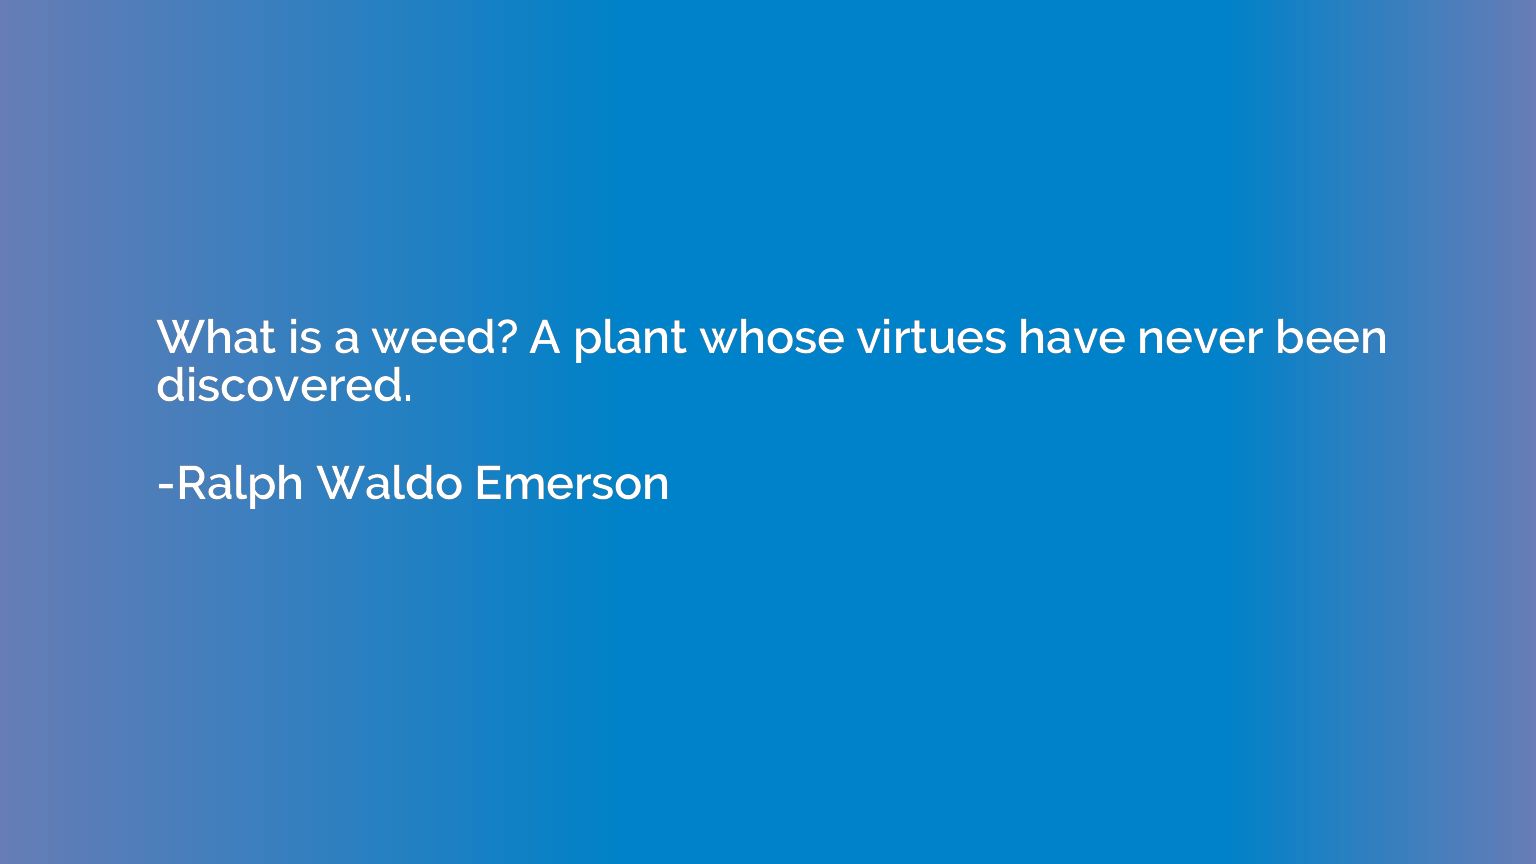 What is a weed? A plant whose virtues have never been discov